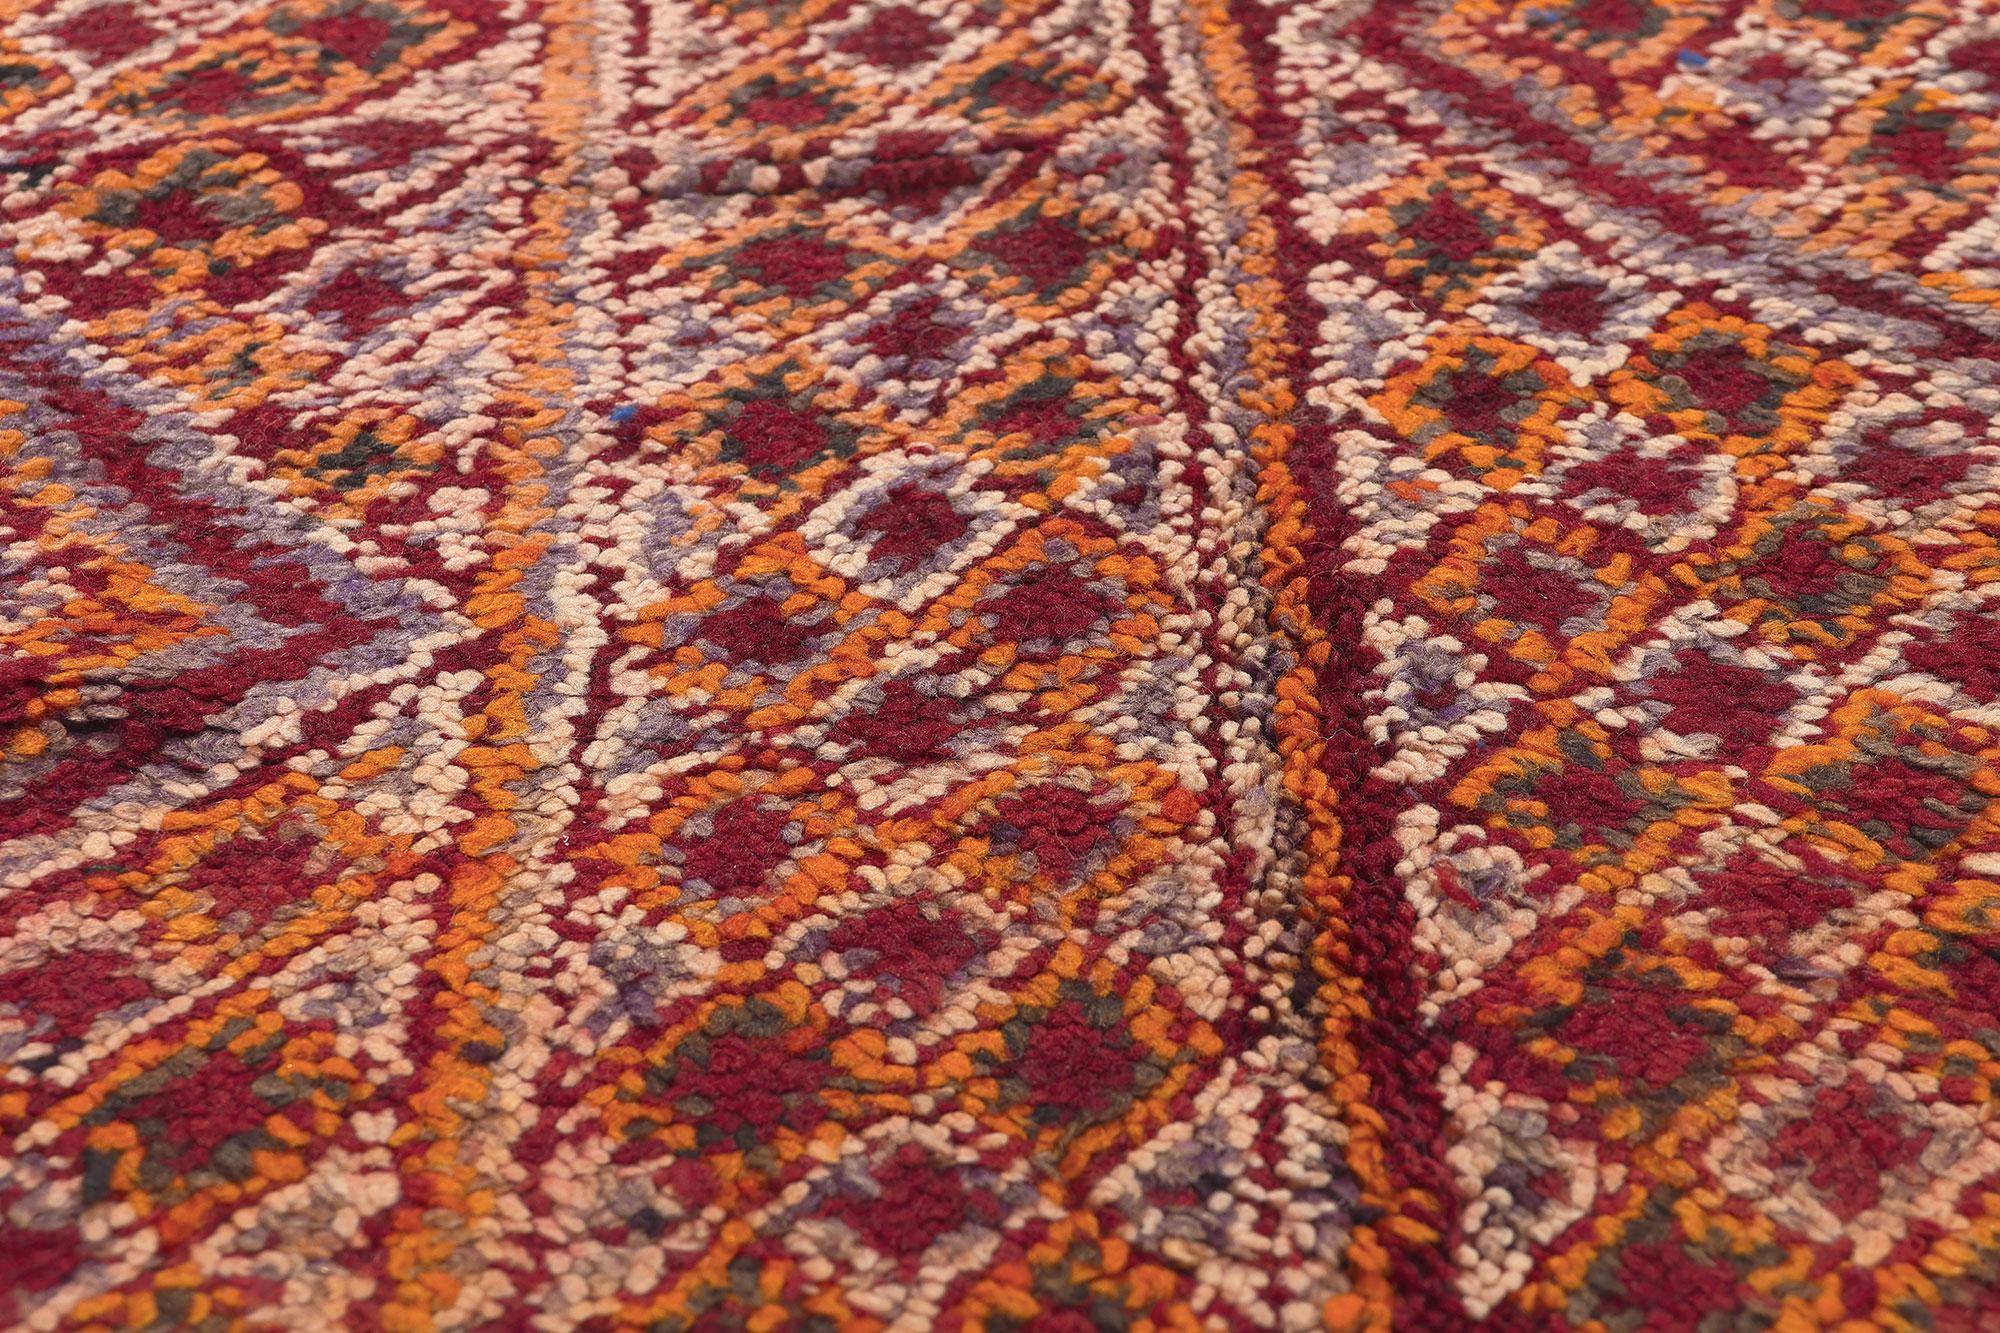 Vintage Beni MGuild Moroccan Rug, Irresistibly Chic Meets Sophisticated Boho In Good Condition For Sale In Dallas, TX